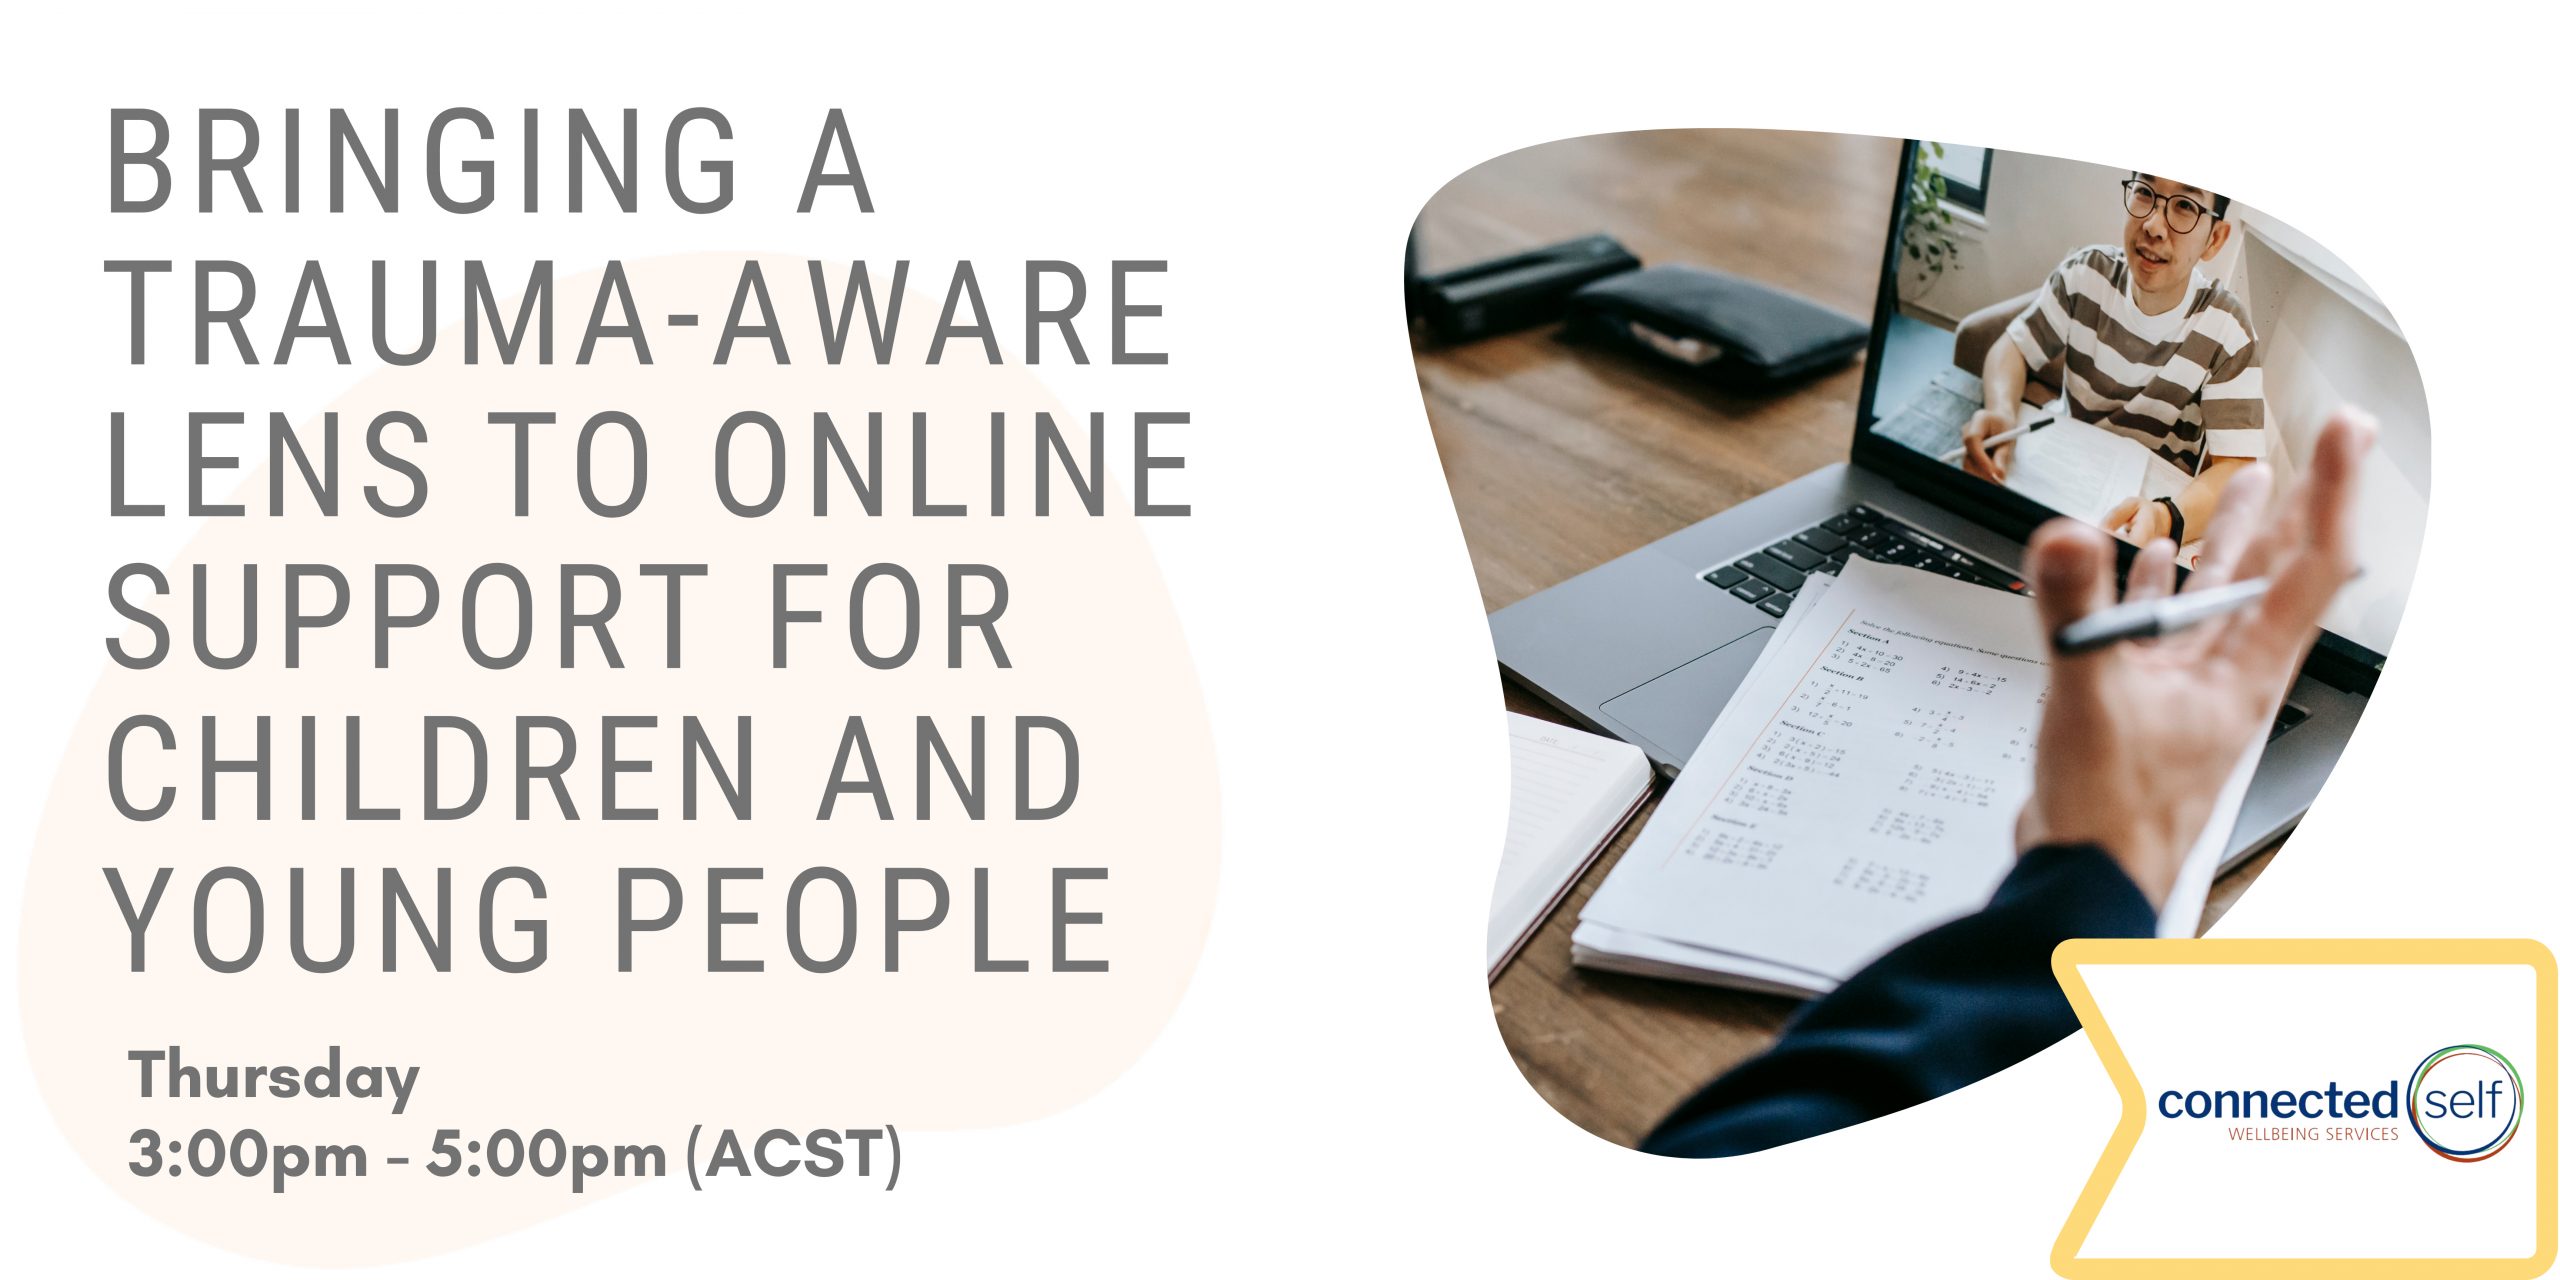 Bringing a Trauma-Aware Lens to Online Support for Children and Young People